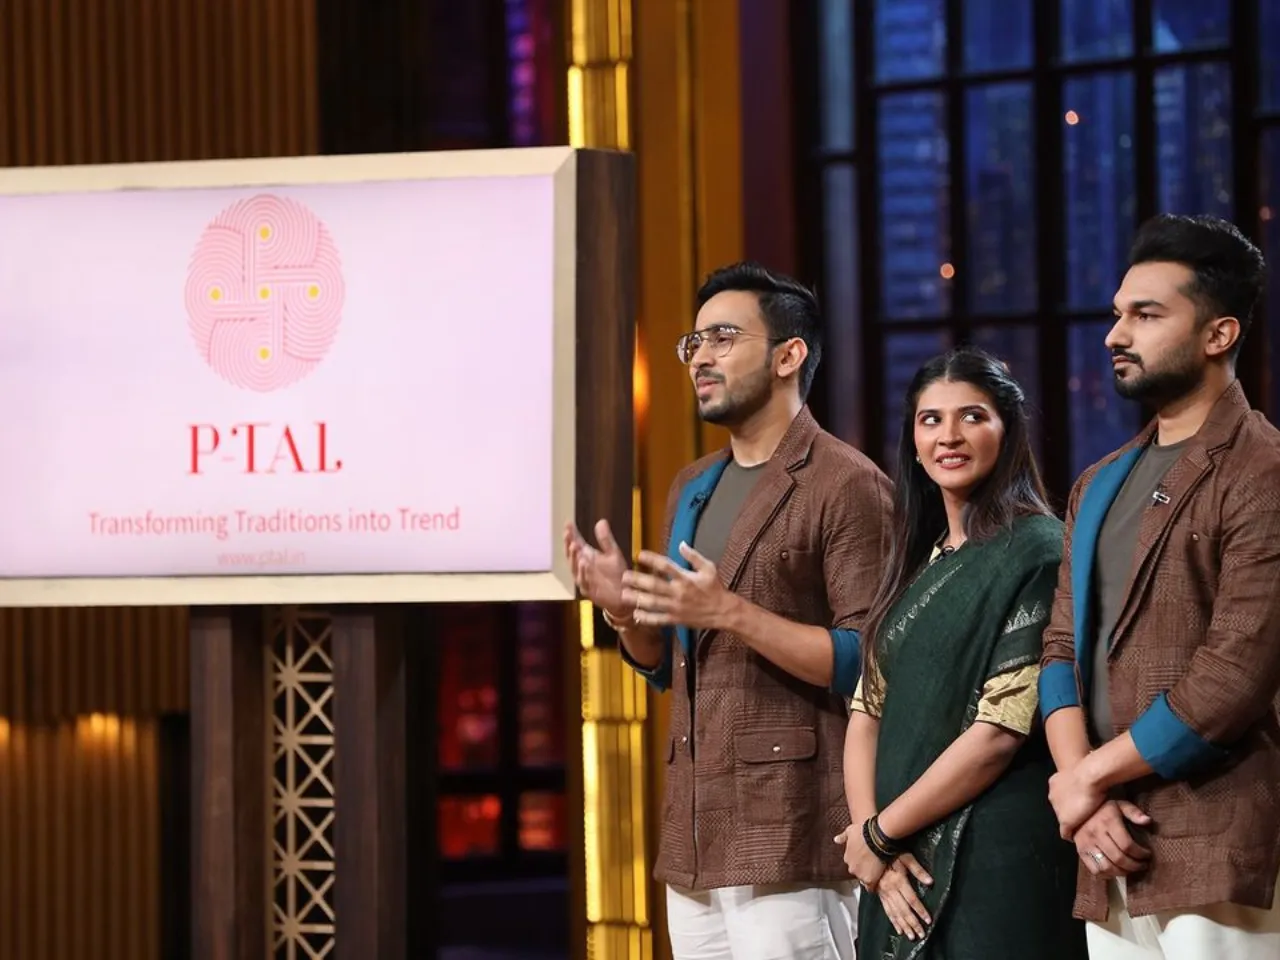 P-Tal, a copper and brassware company, returns cheques received from all the judges on Shark Tank India